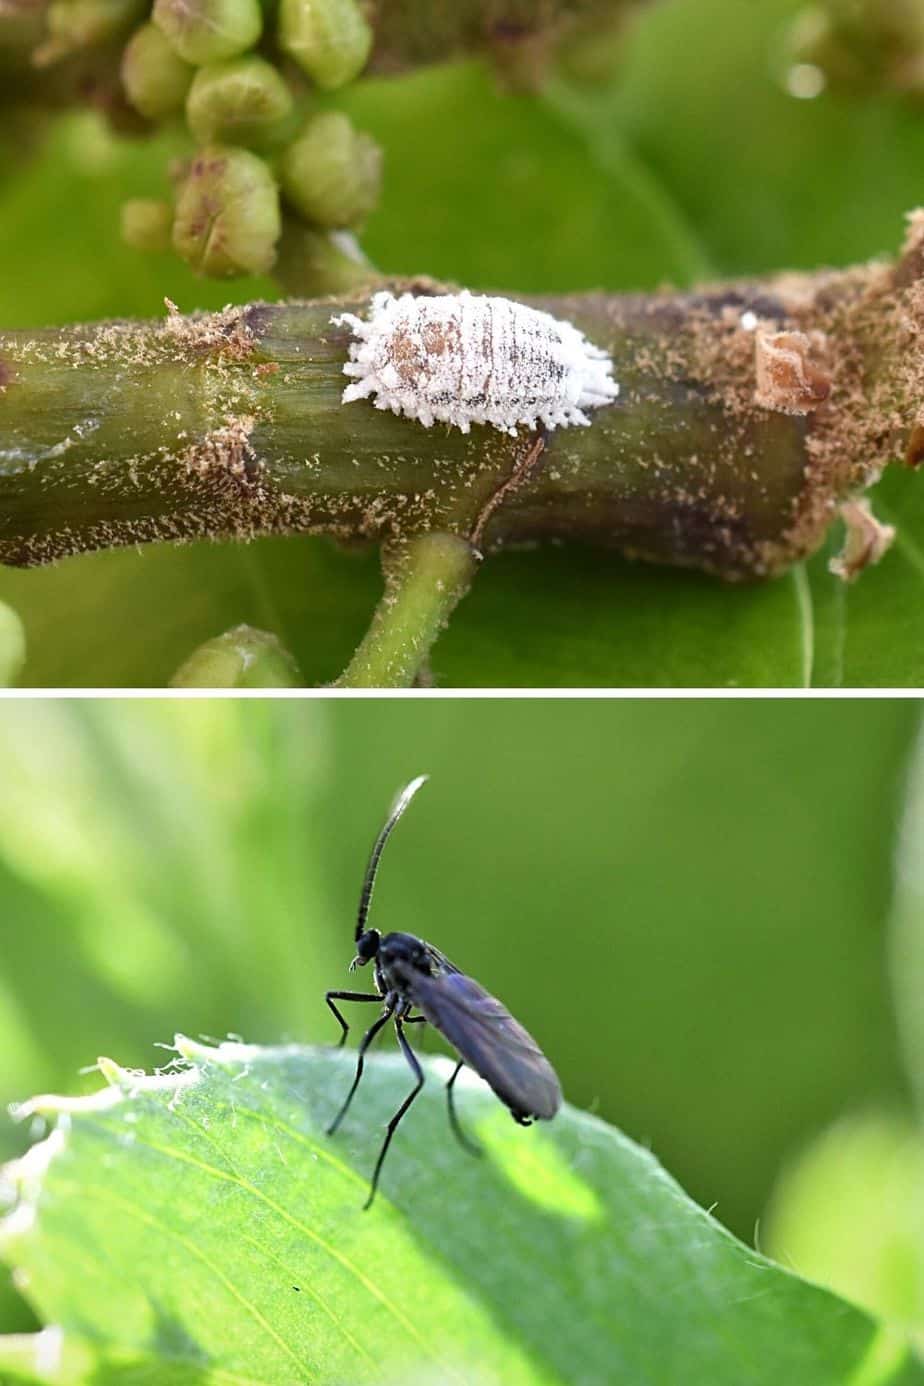 Some gardeners confuse the root aphids with mealybugs and fungus gnats in their winged stages